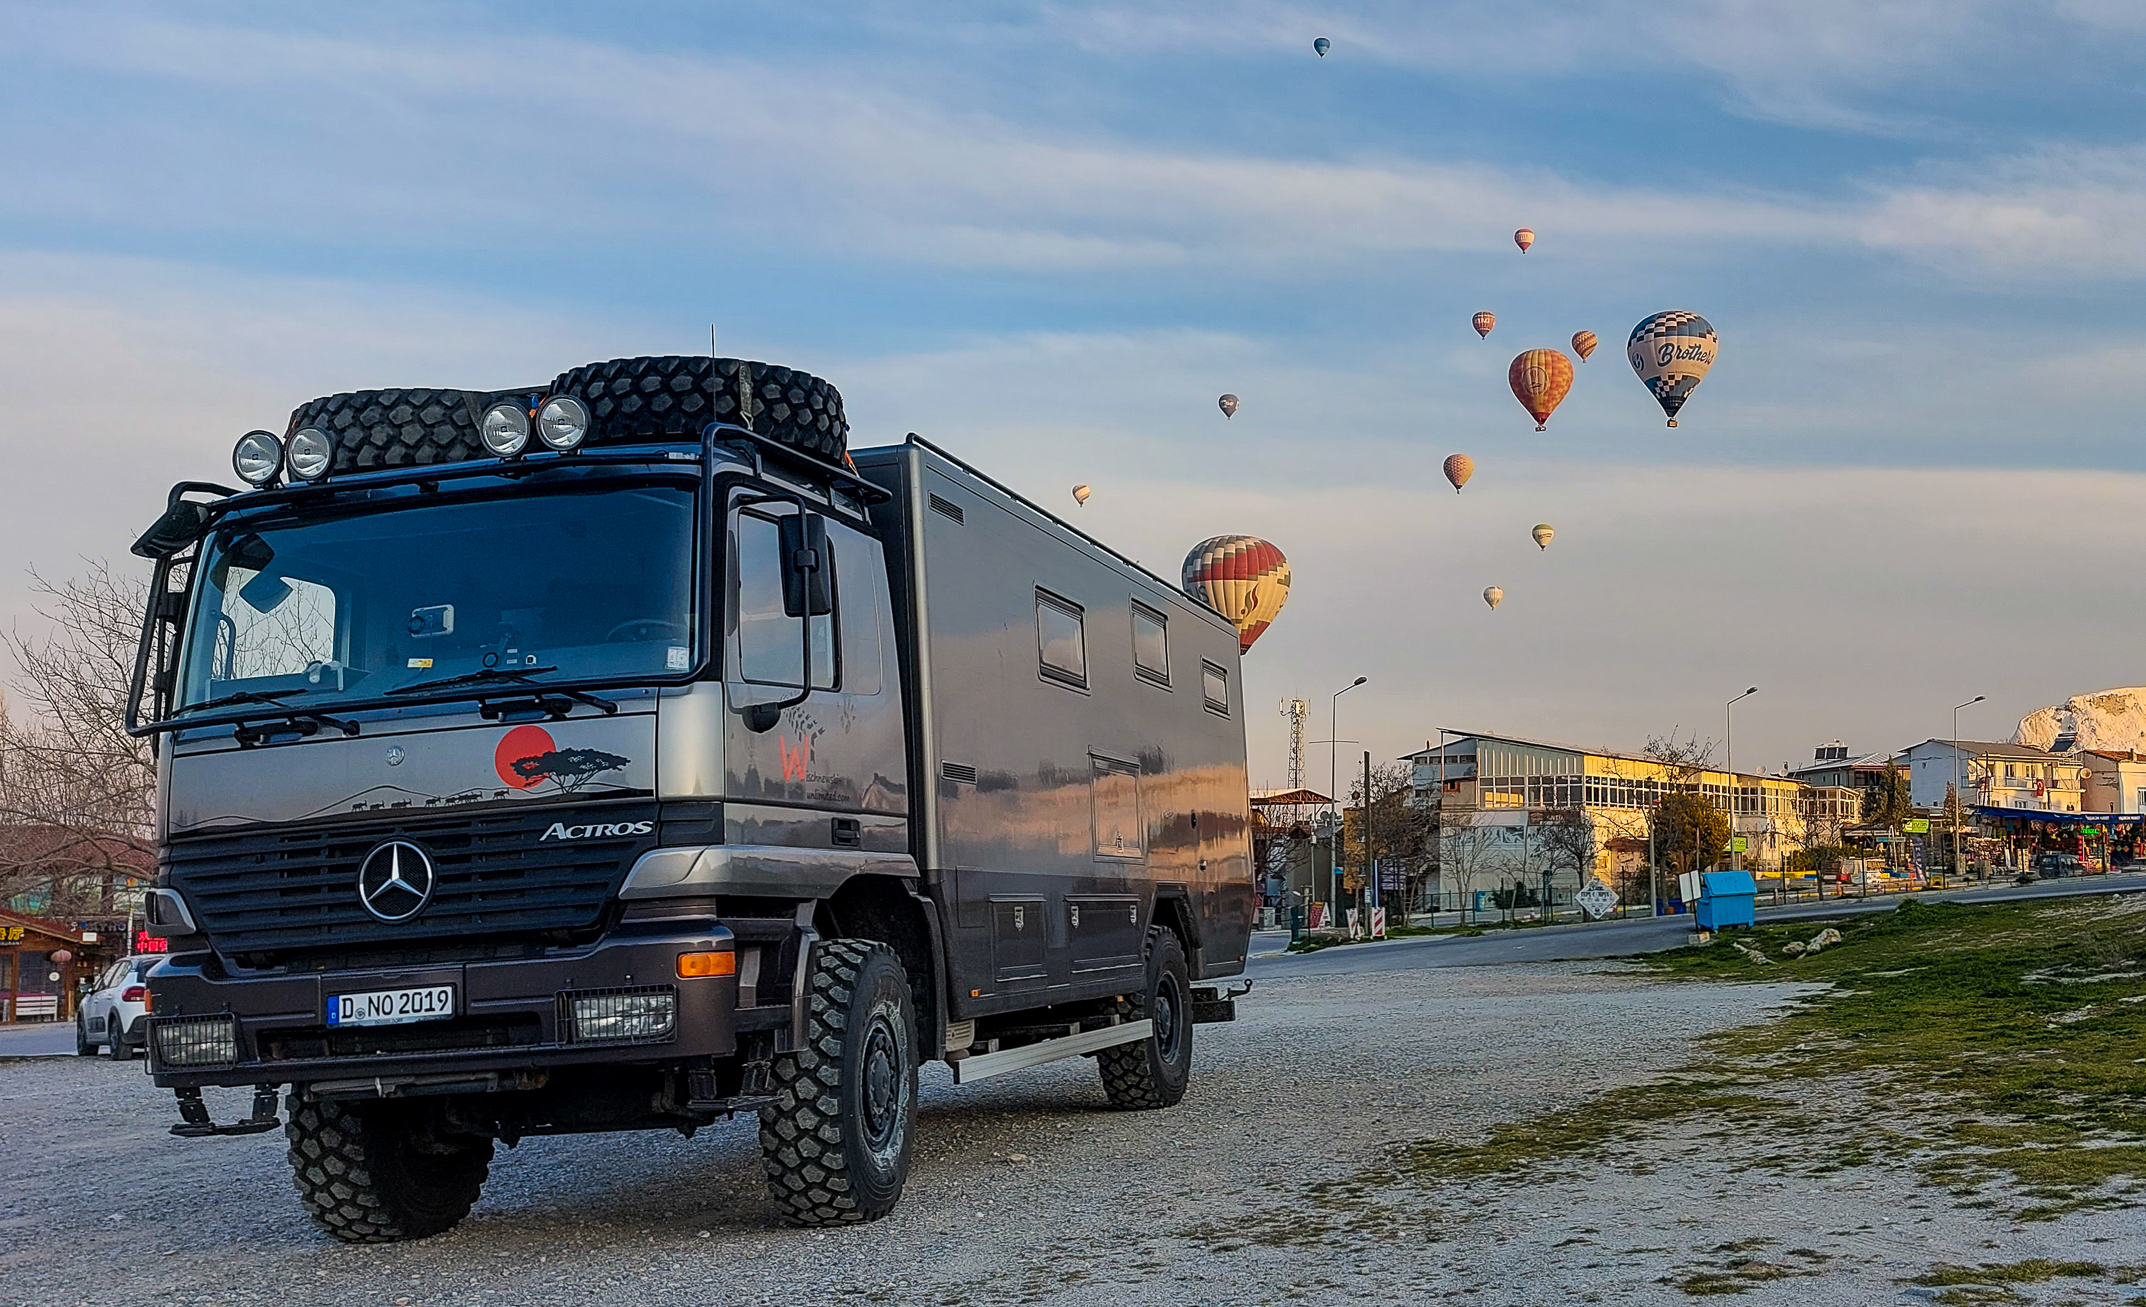 <span  class="uc_style_uc_tiles_grid_image_elementor_uc_items_attribute_title" style="color:#FFFFFF;">Pamukkale:special thing are the baloons that start their trip in the mornings</span>